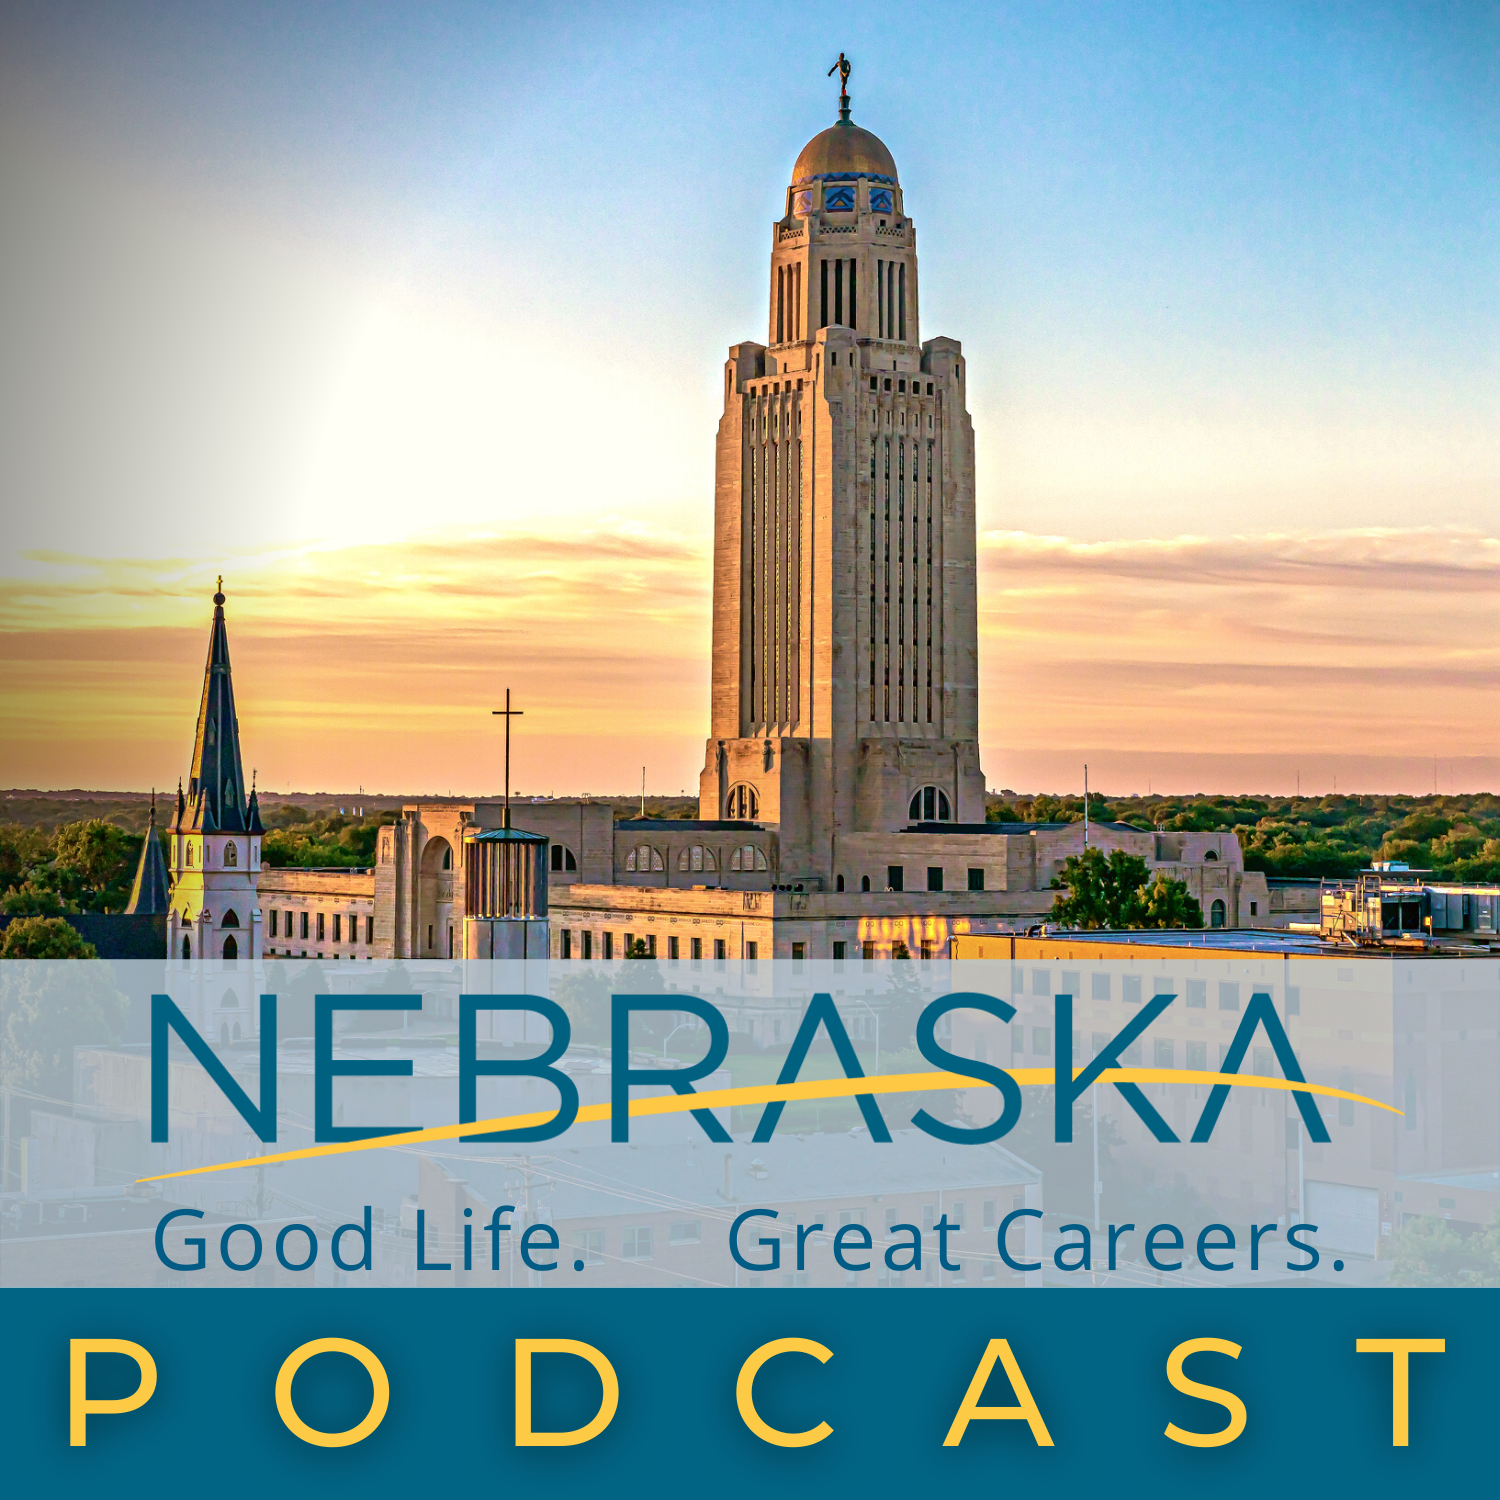 Great careers Podcast Link